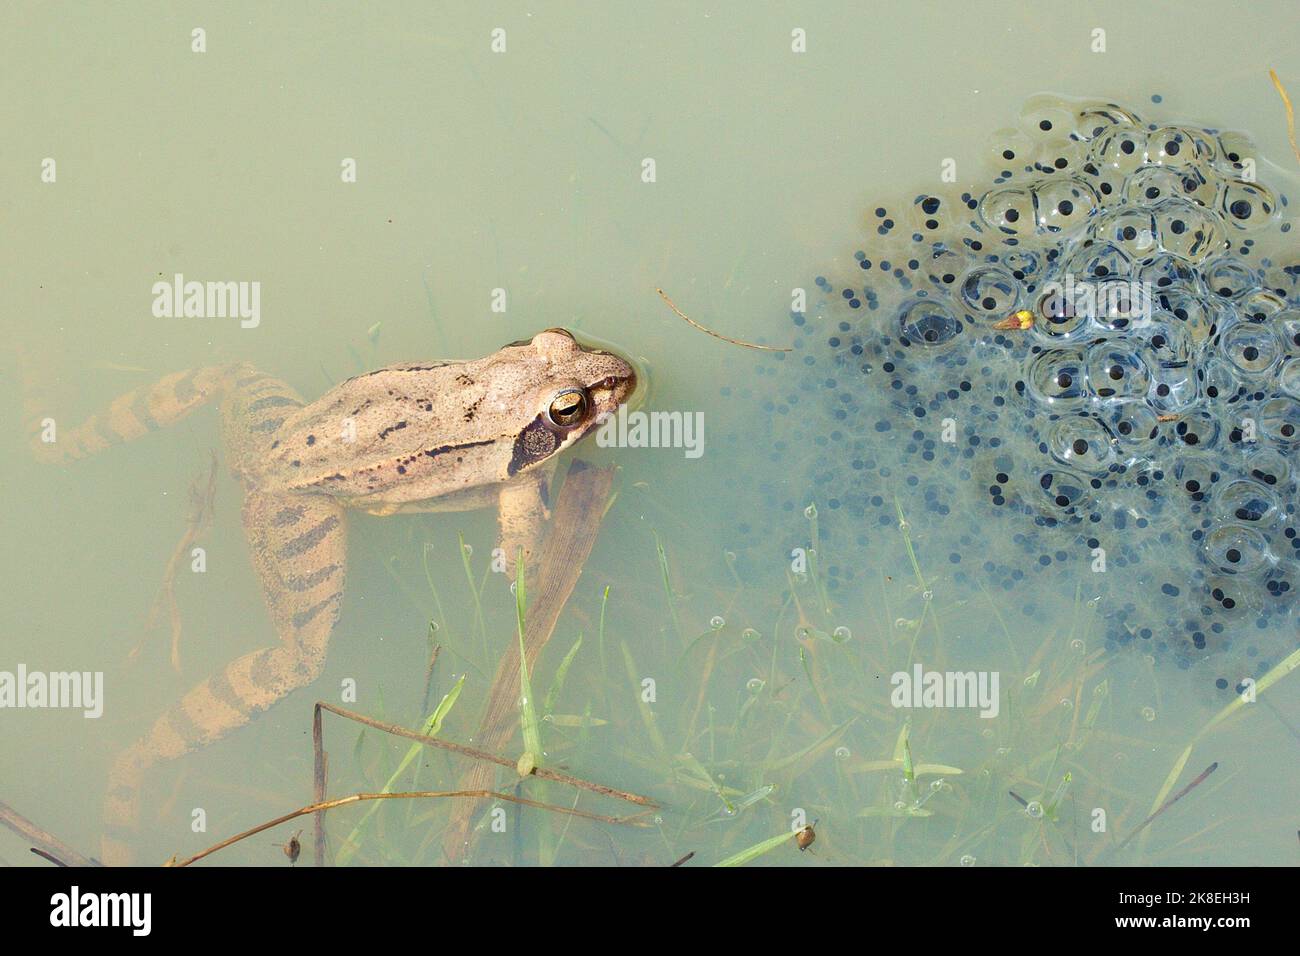 Agile frog (Rana dalmatina) with a clutch of eggs in natural habitat Stock Photo